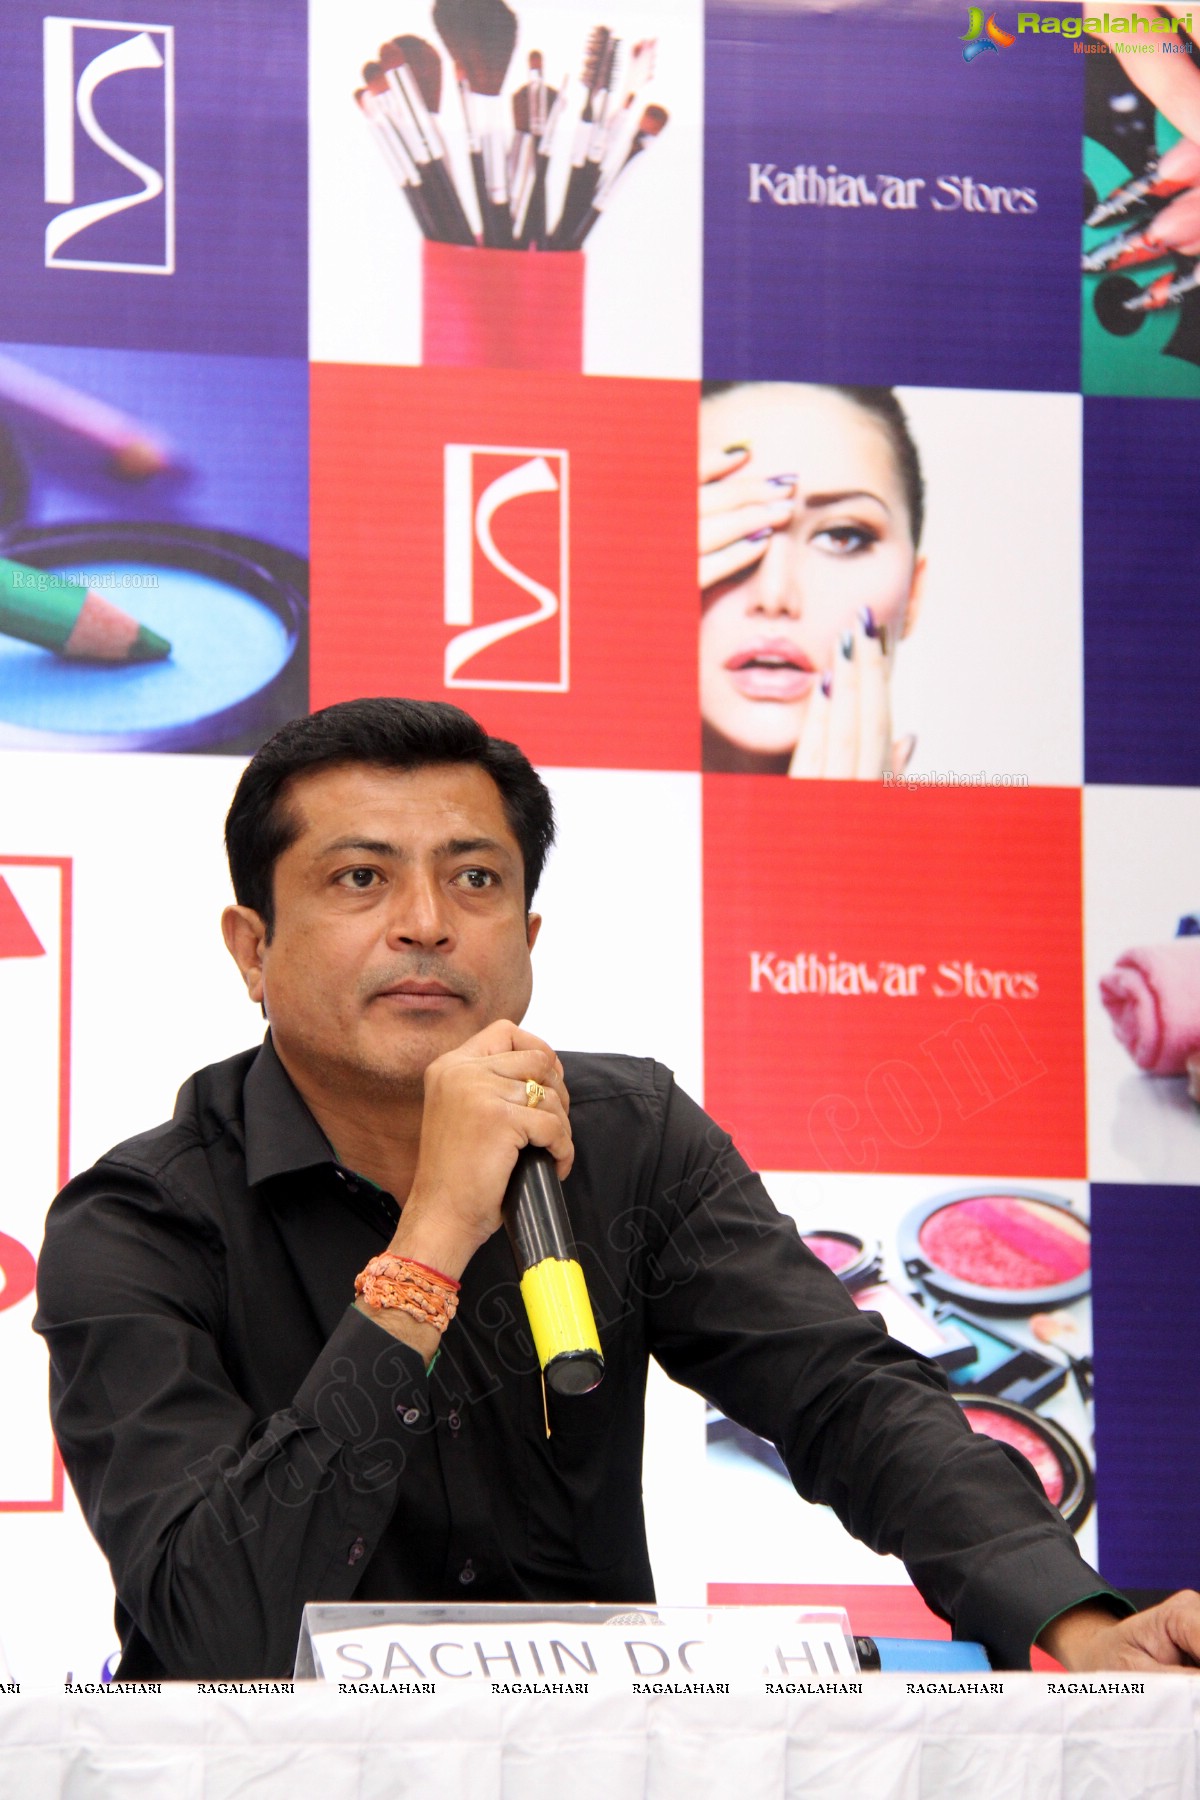 Kathiawar Stores inaugurates its 3rd Multi-brand store at Jubilee Hills